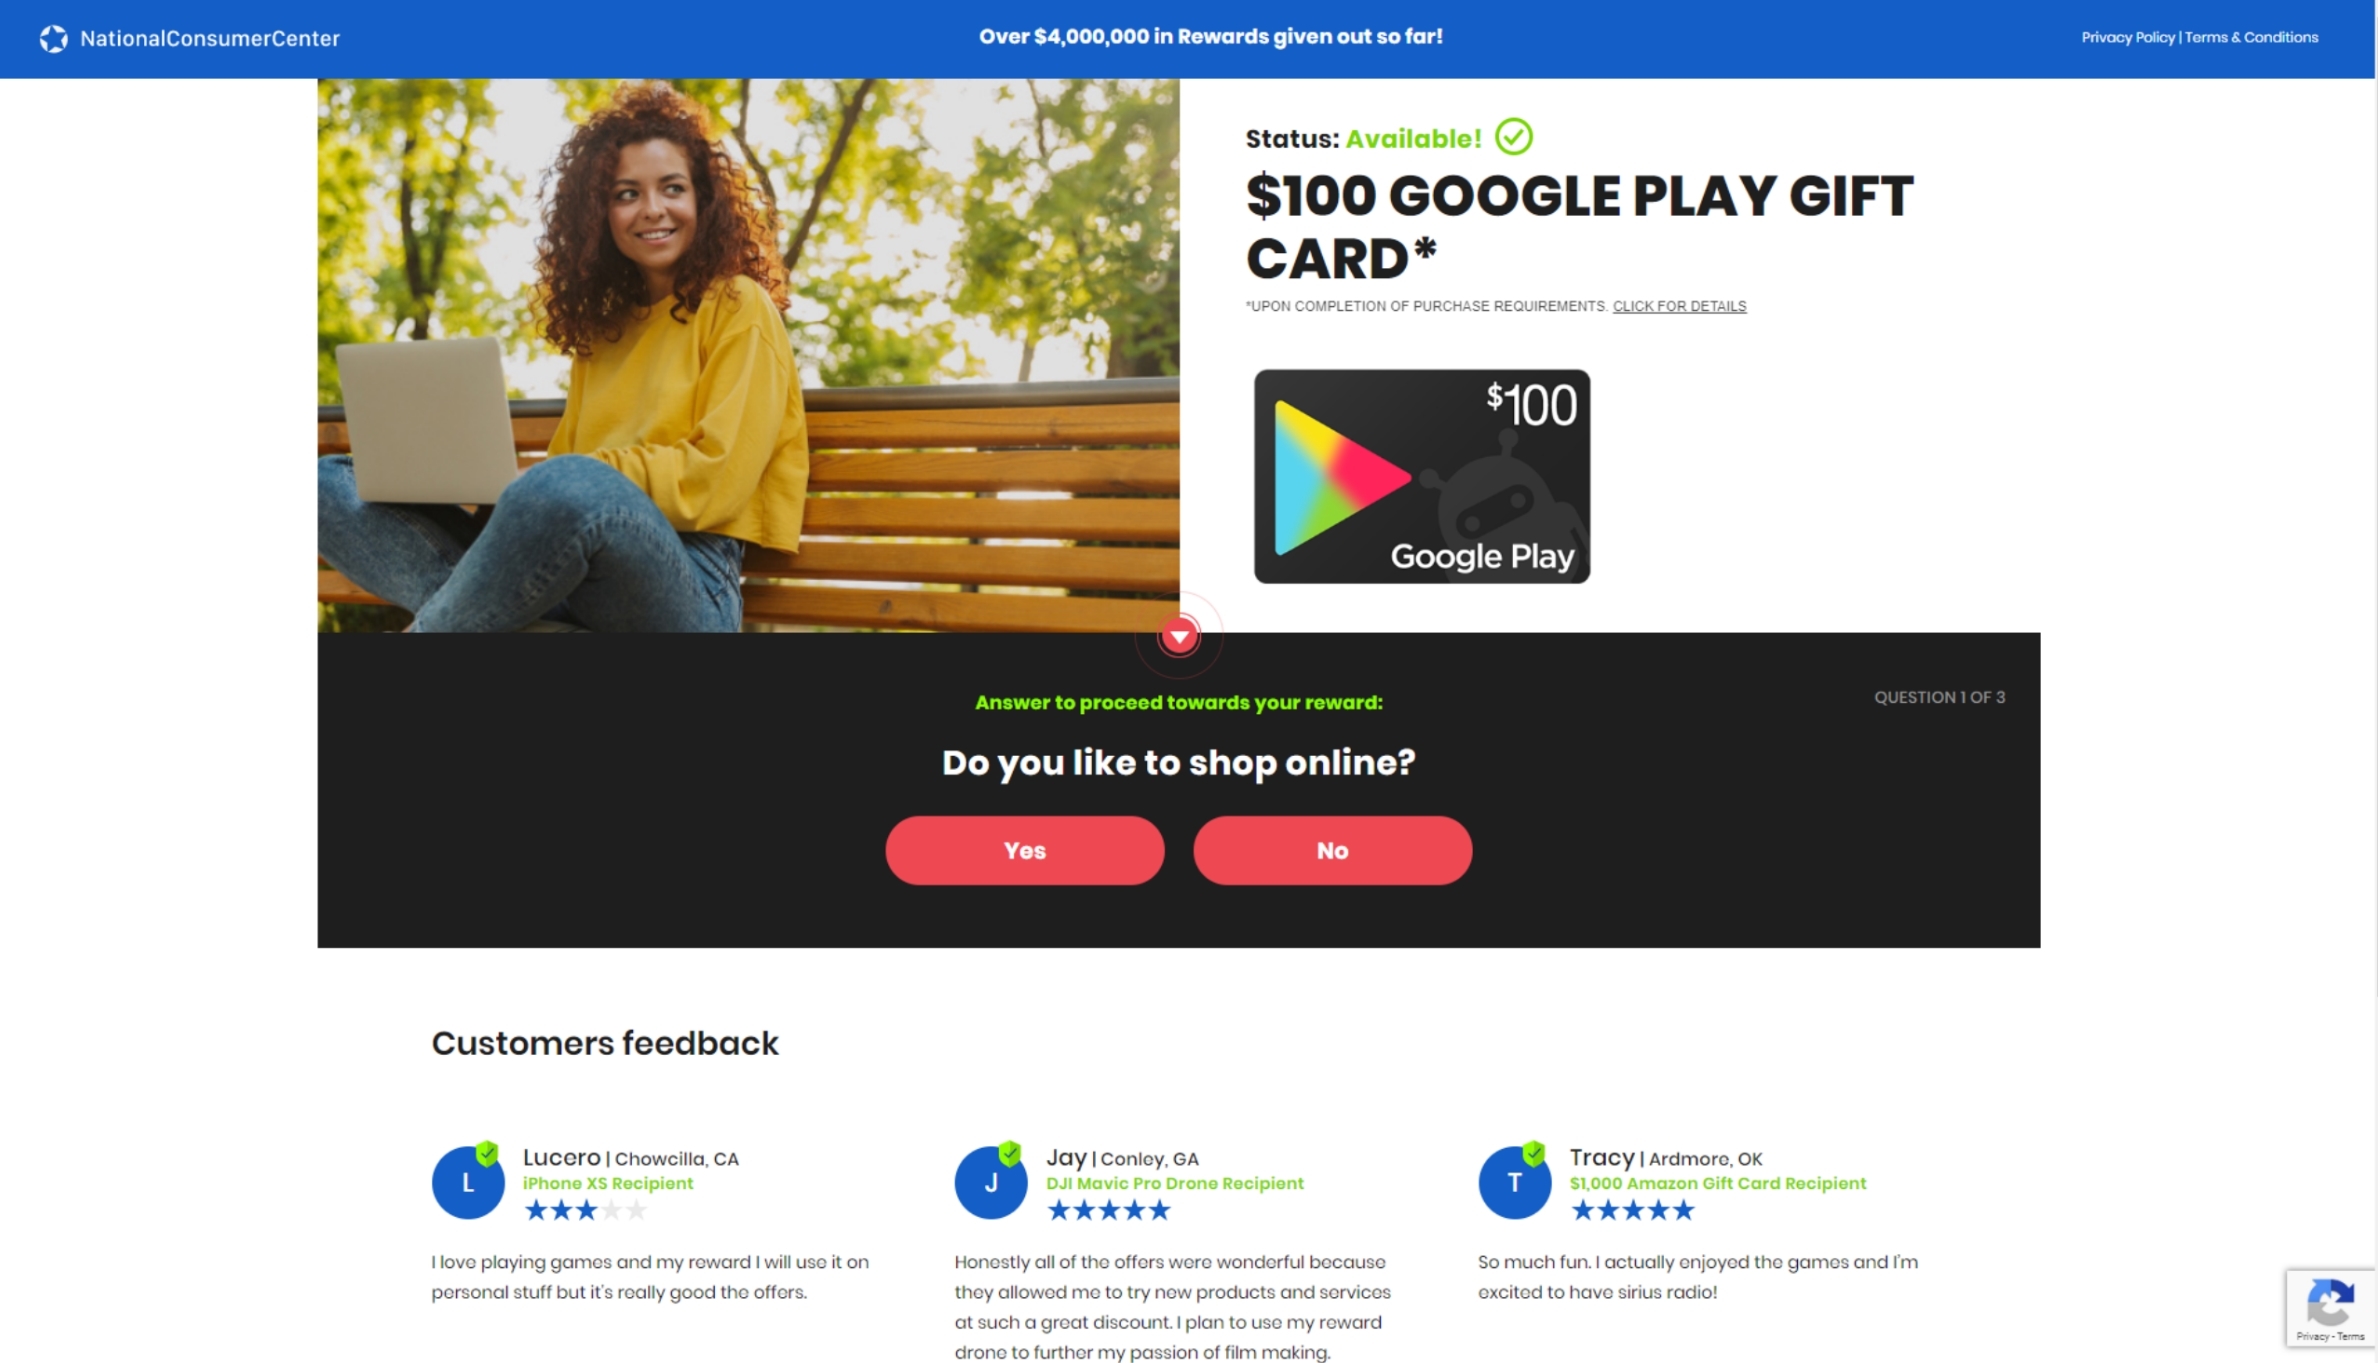 Get a $100 Google Play Gift Card Giveaway